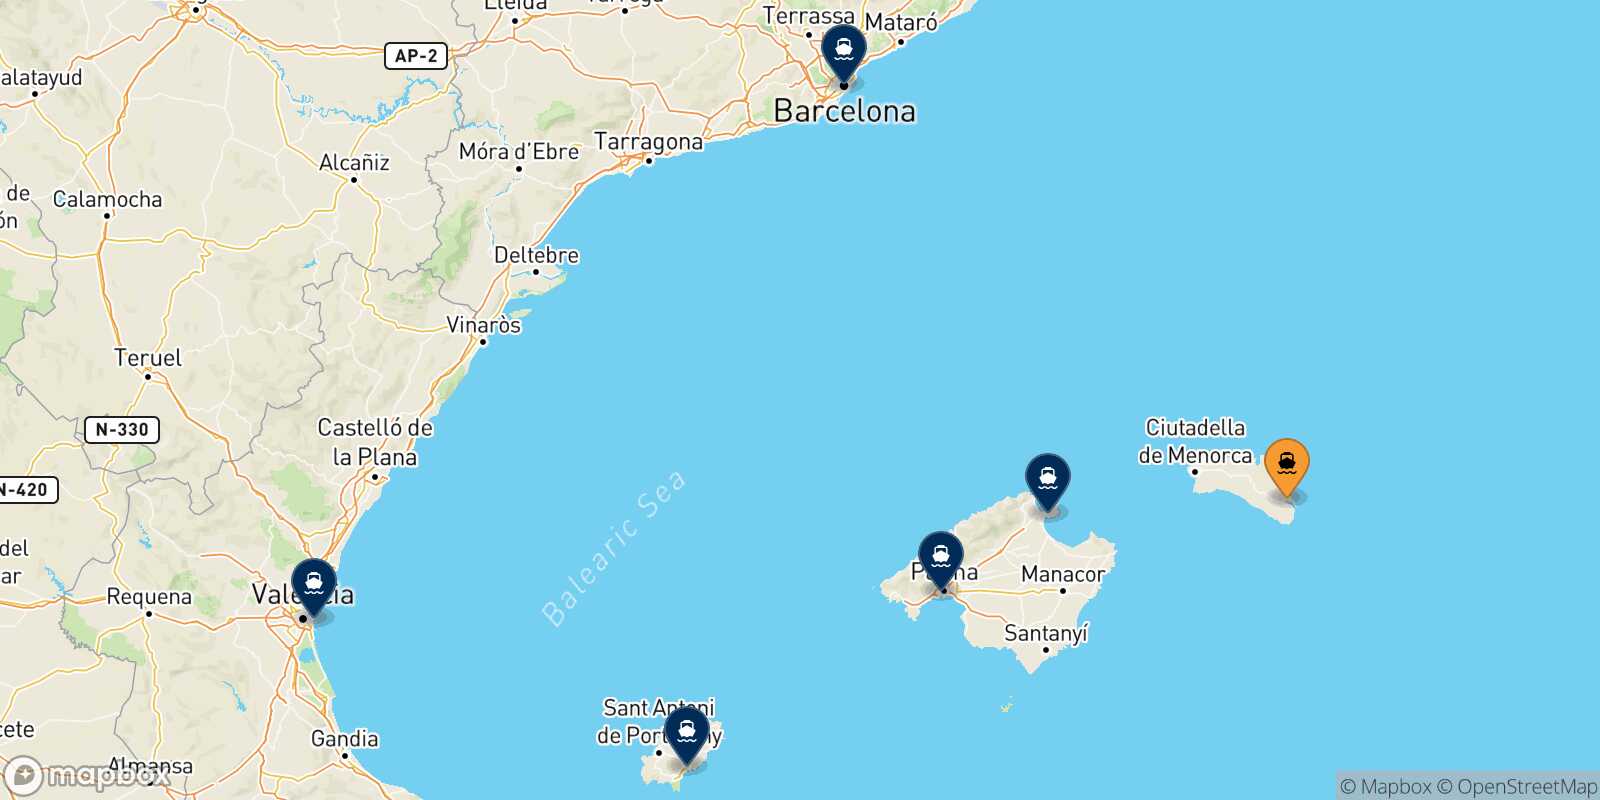 Map of the destinations reachable from Mahon (Minorca)